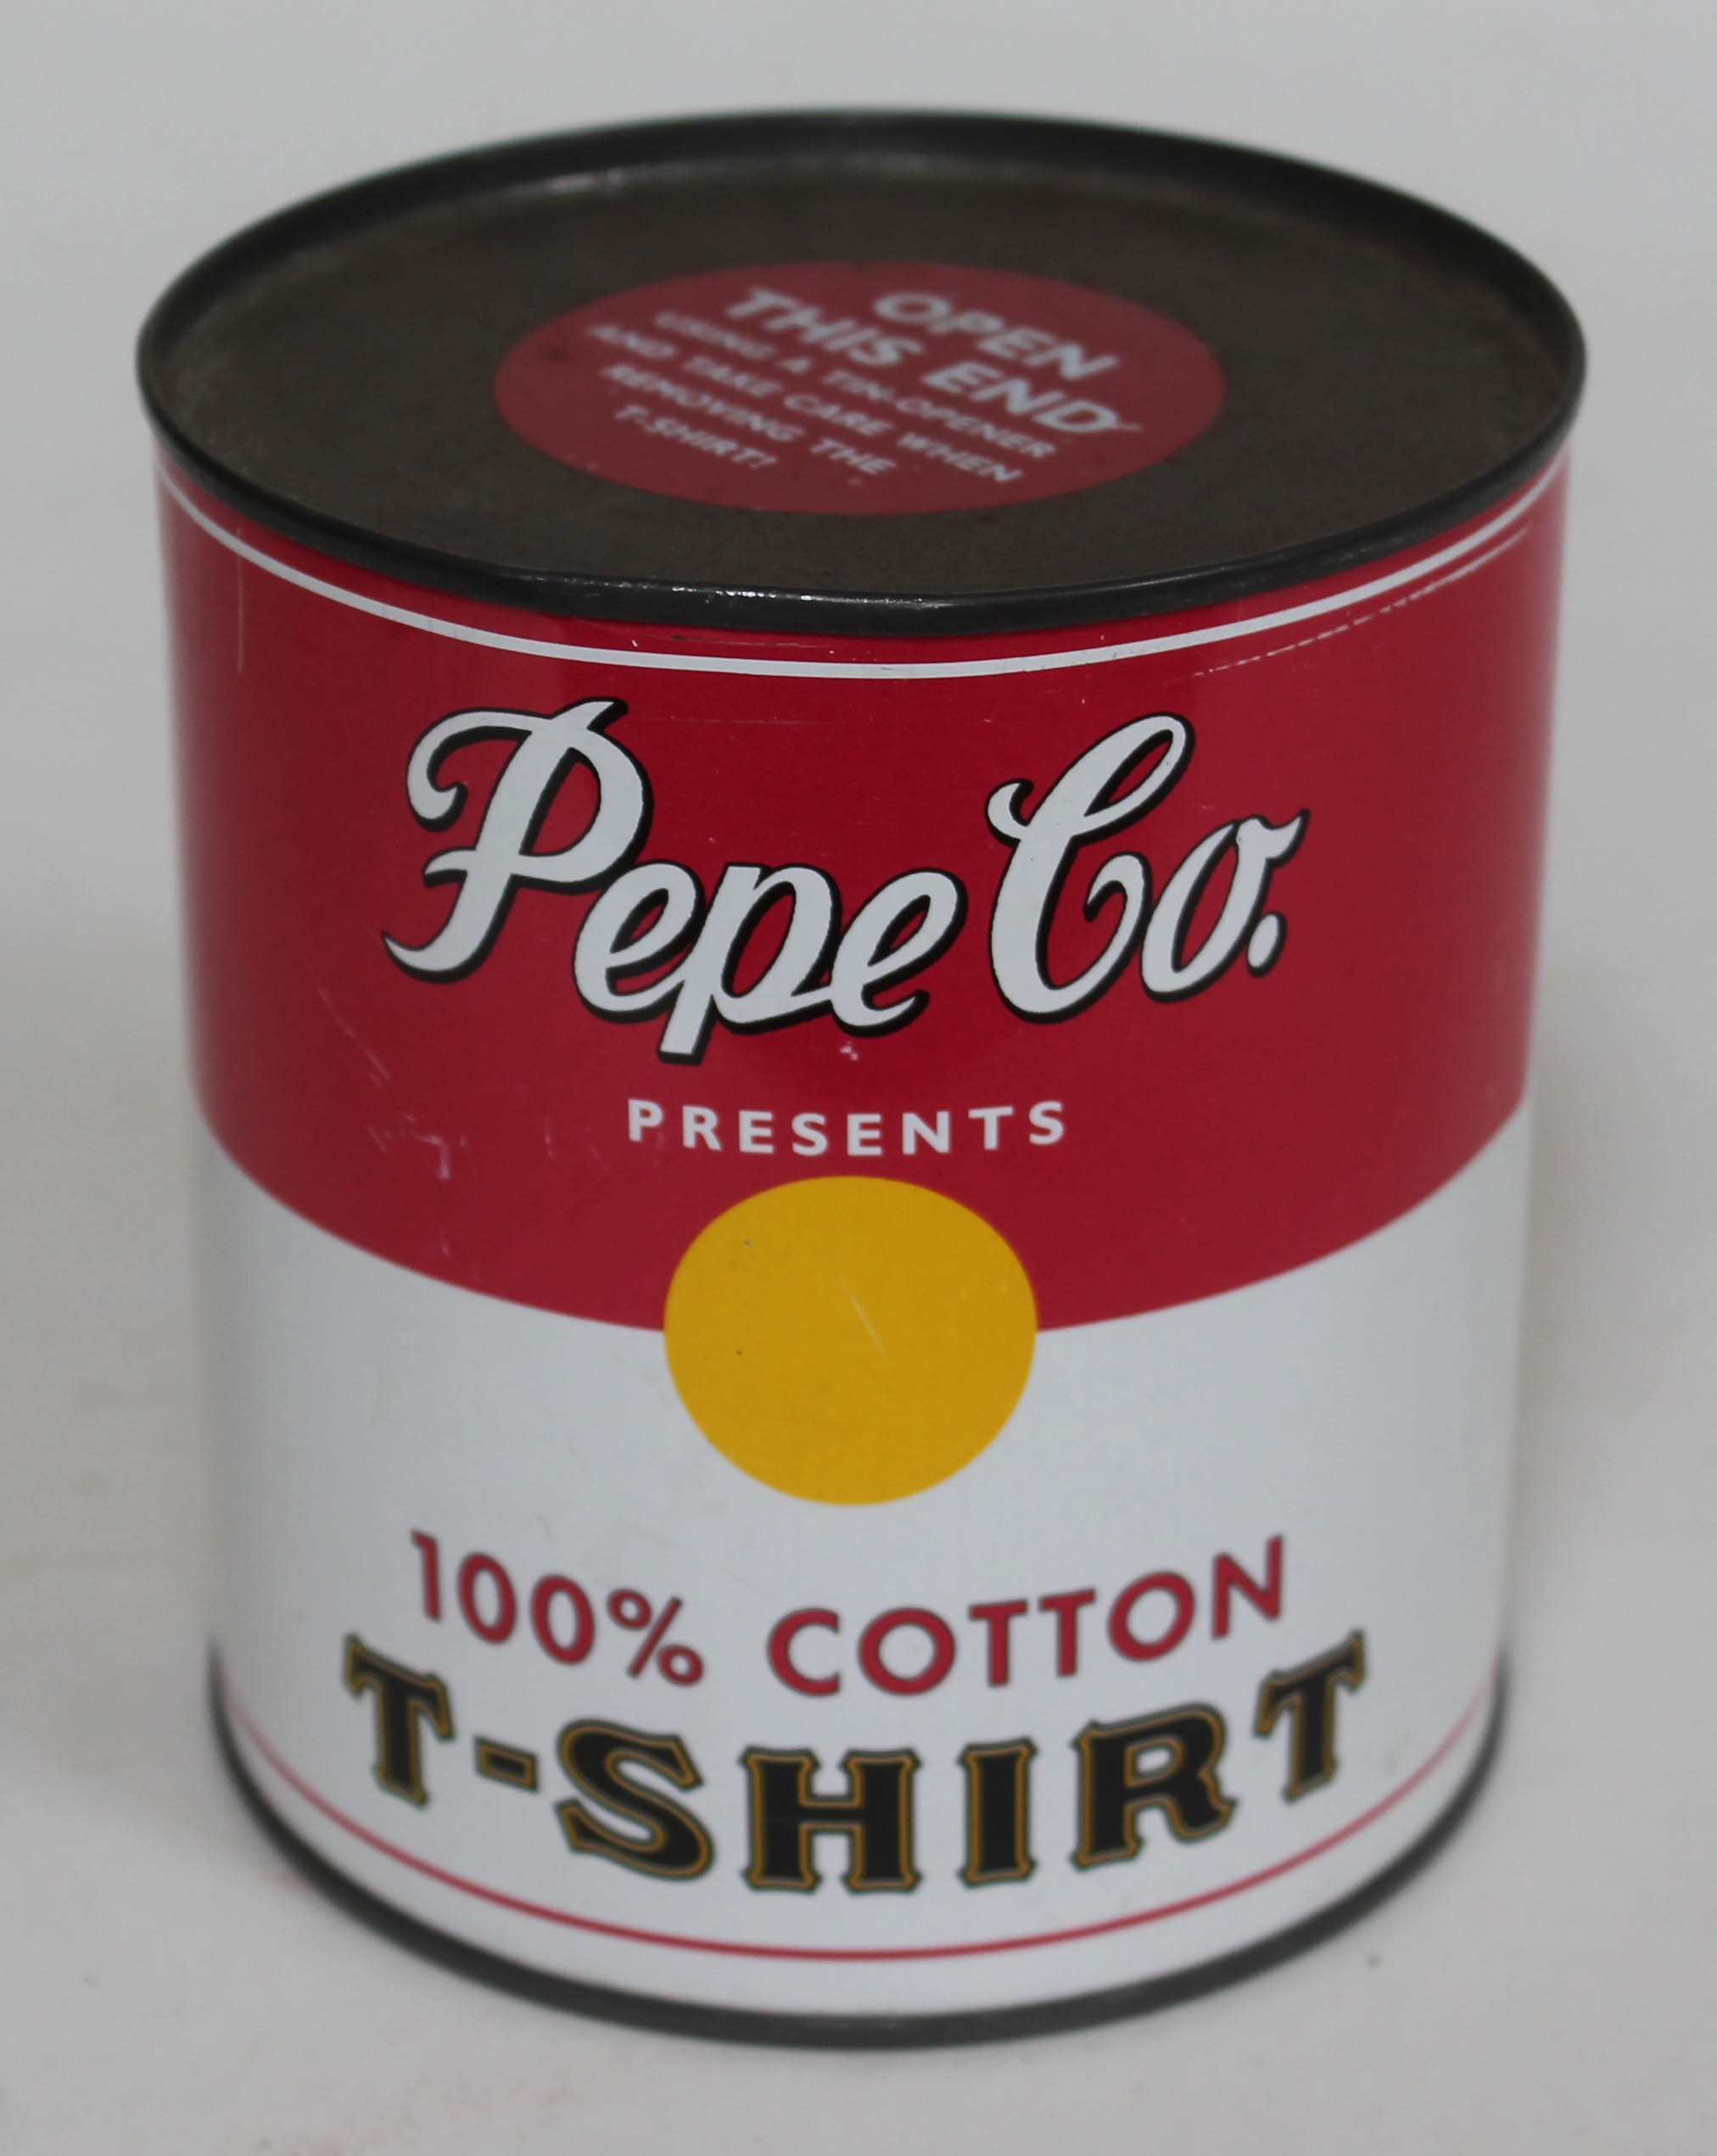 A Pepe Co T-Shirt in a can circa 1990, sealed.